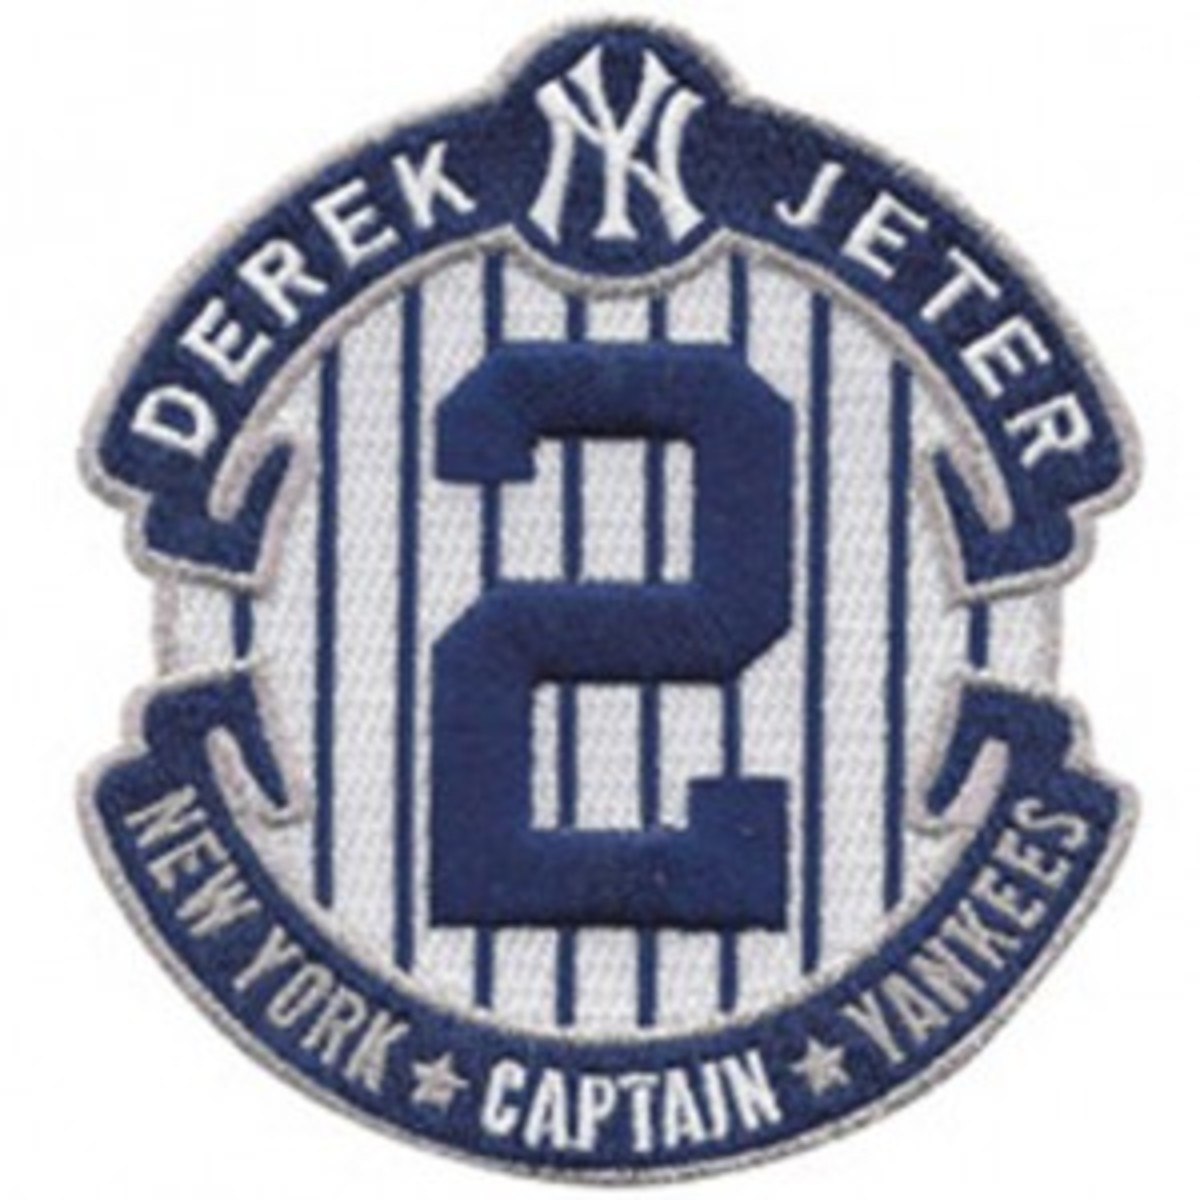 New York Yankees Derek Jeter gets a tribute from the Empire State